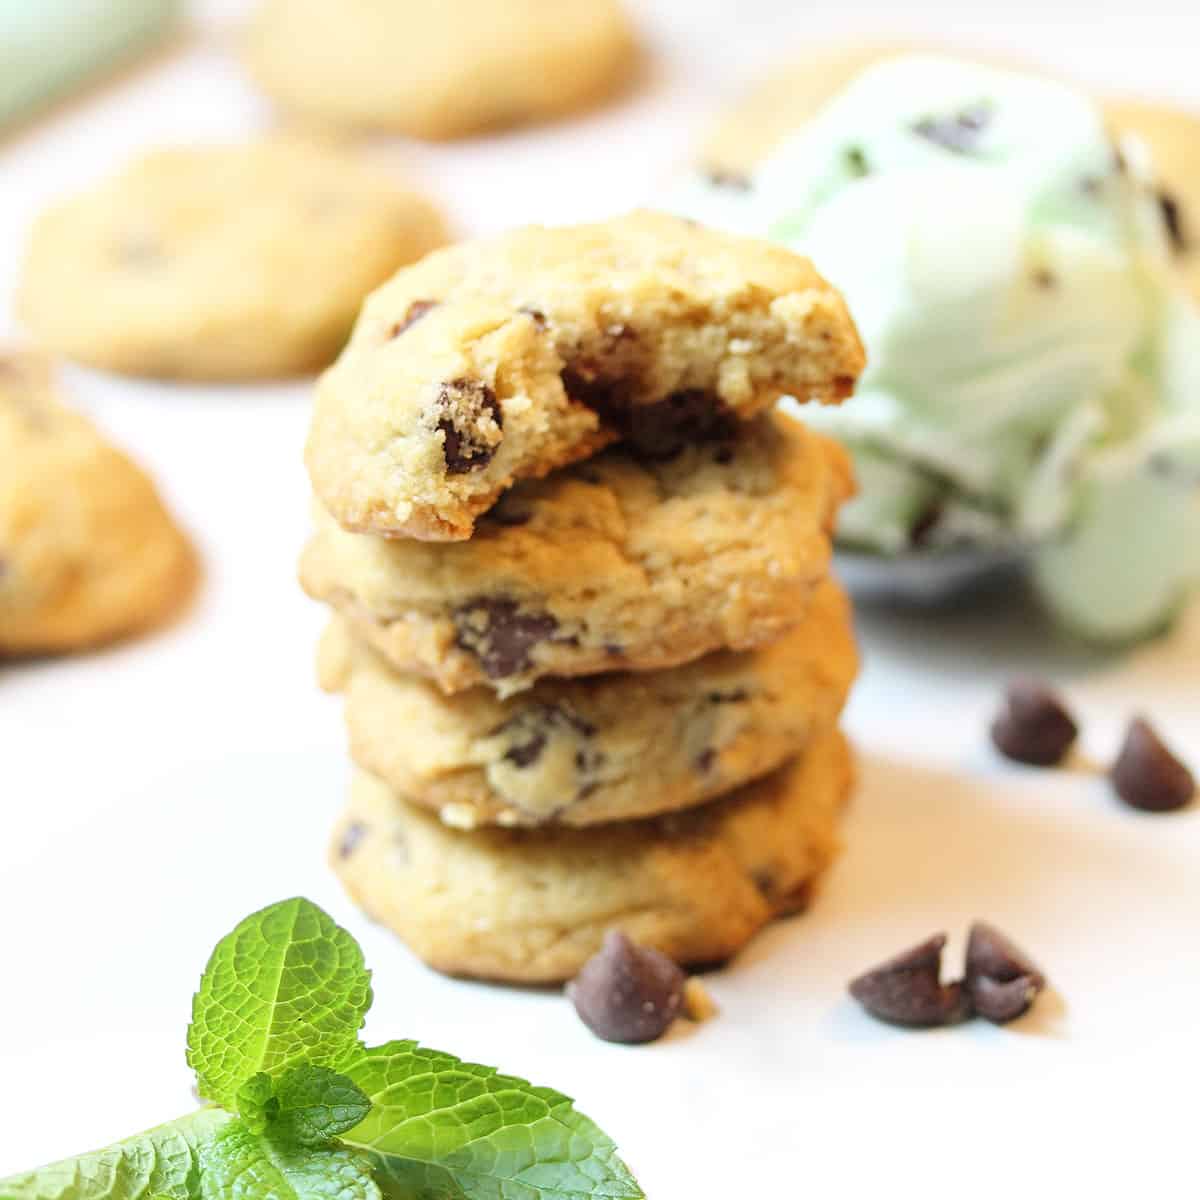 Stack of cookies with bite taken from top cookie with ice cream scoop.